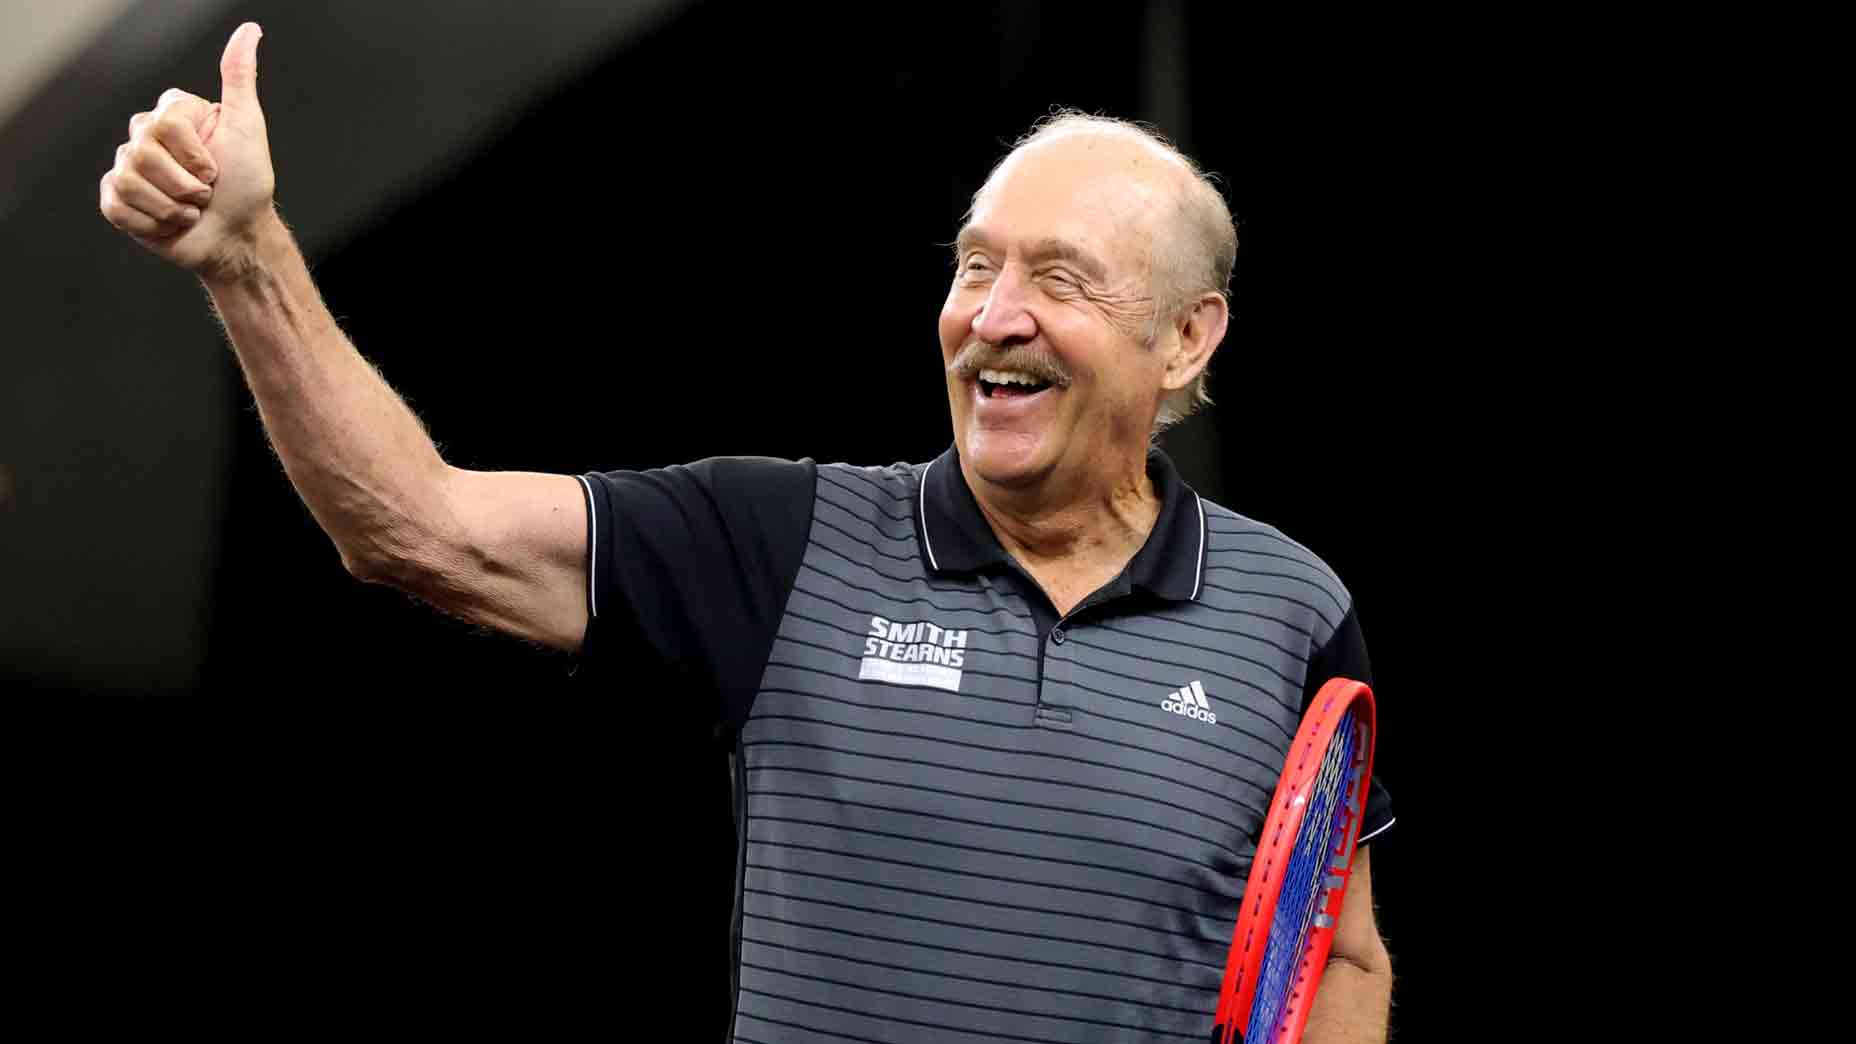 Stan Smith Q&A: Turns out, the tennis legend is a pretty good stick